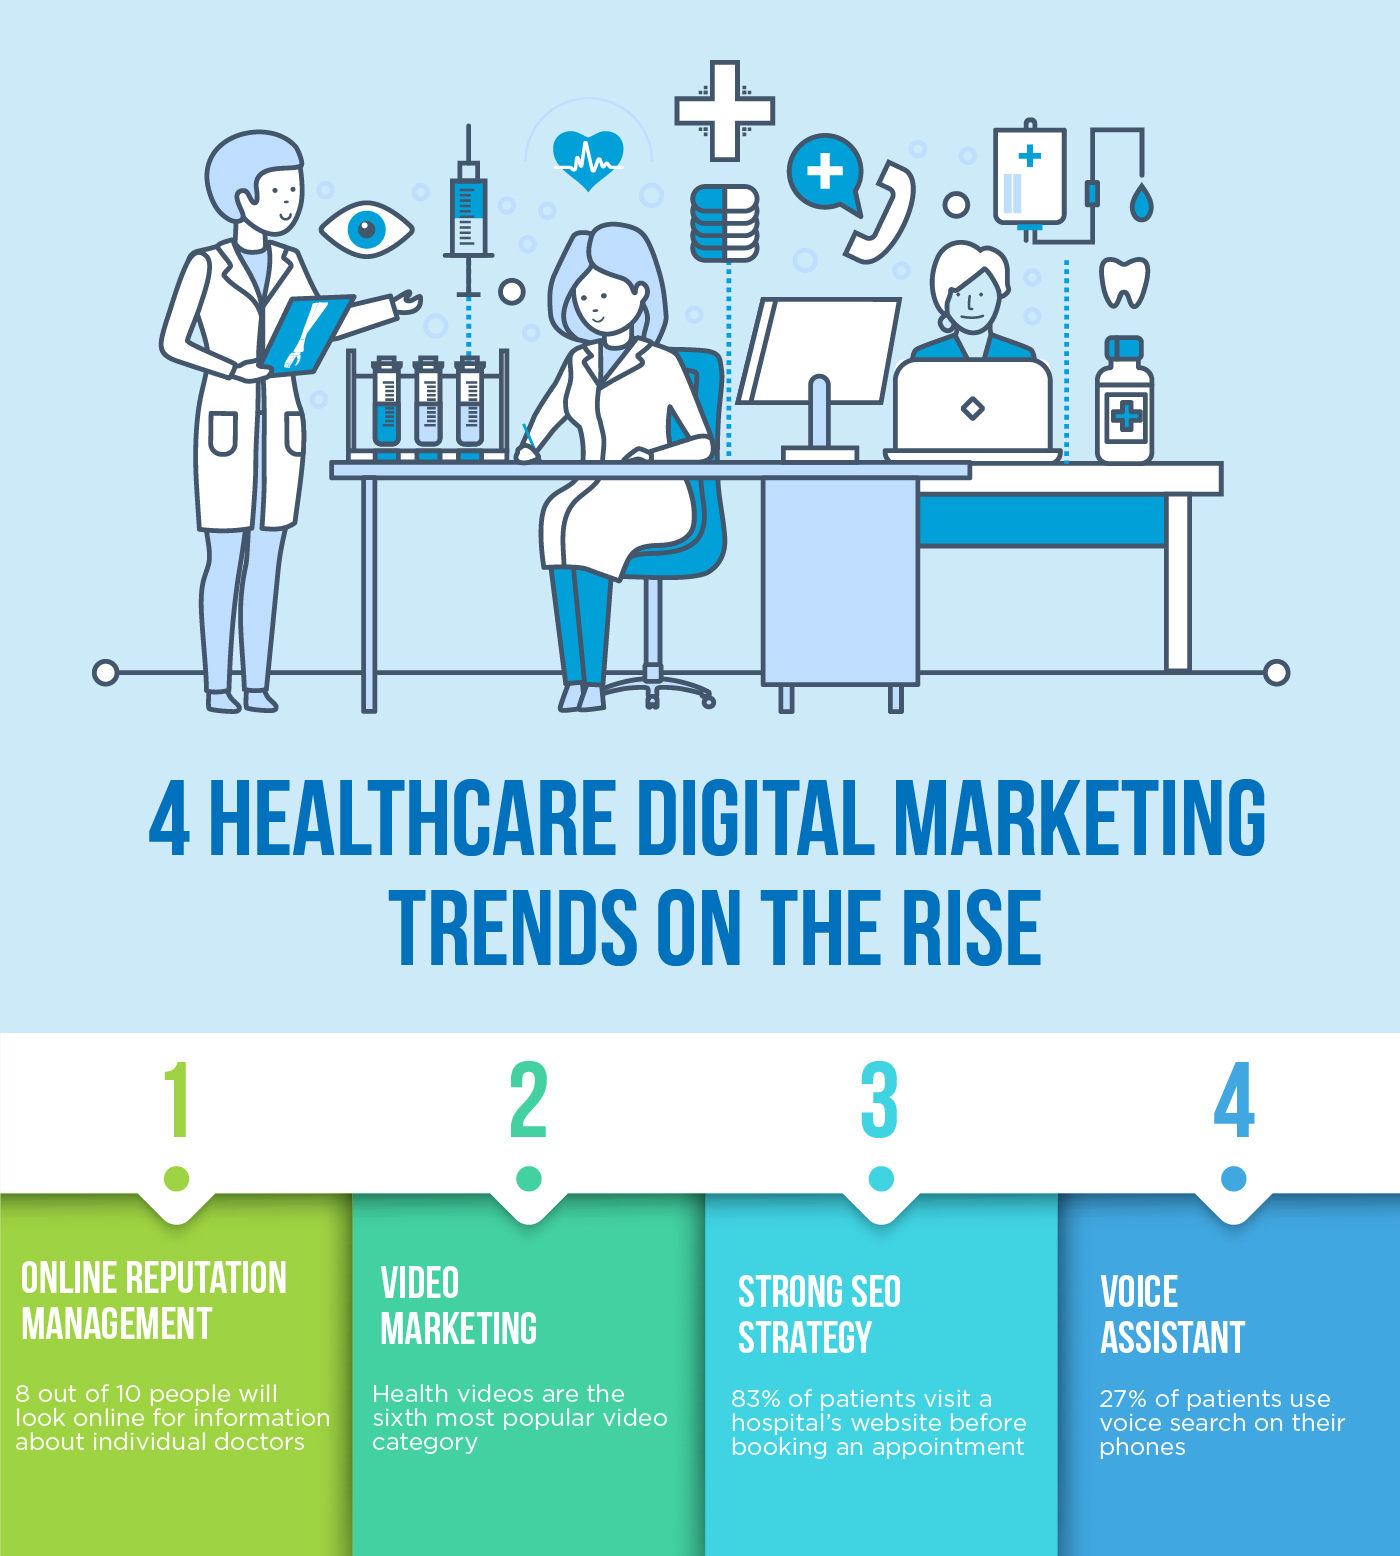 4 Healthcare Digital Marketing Trends on the Rise for 2019